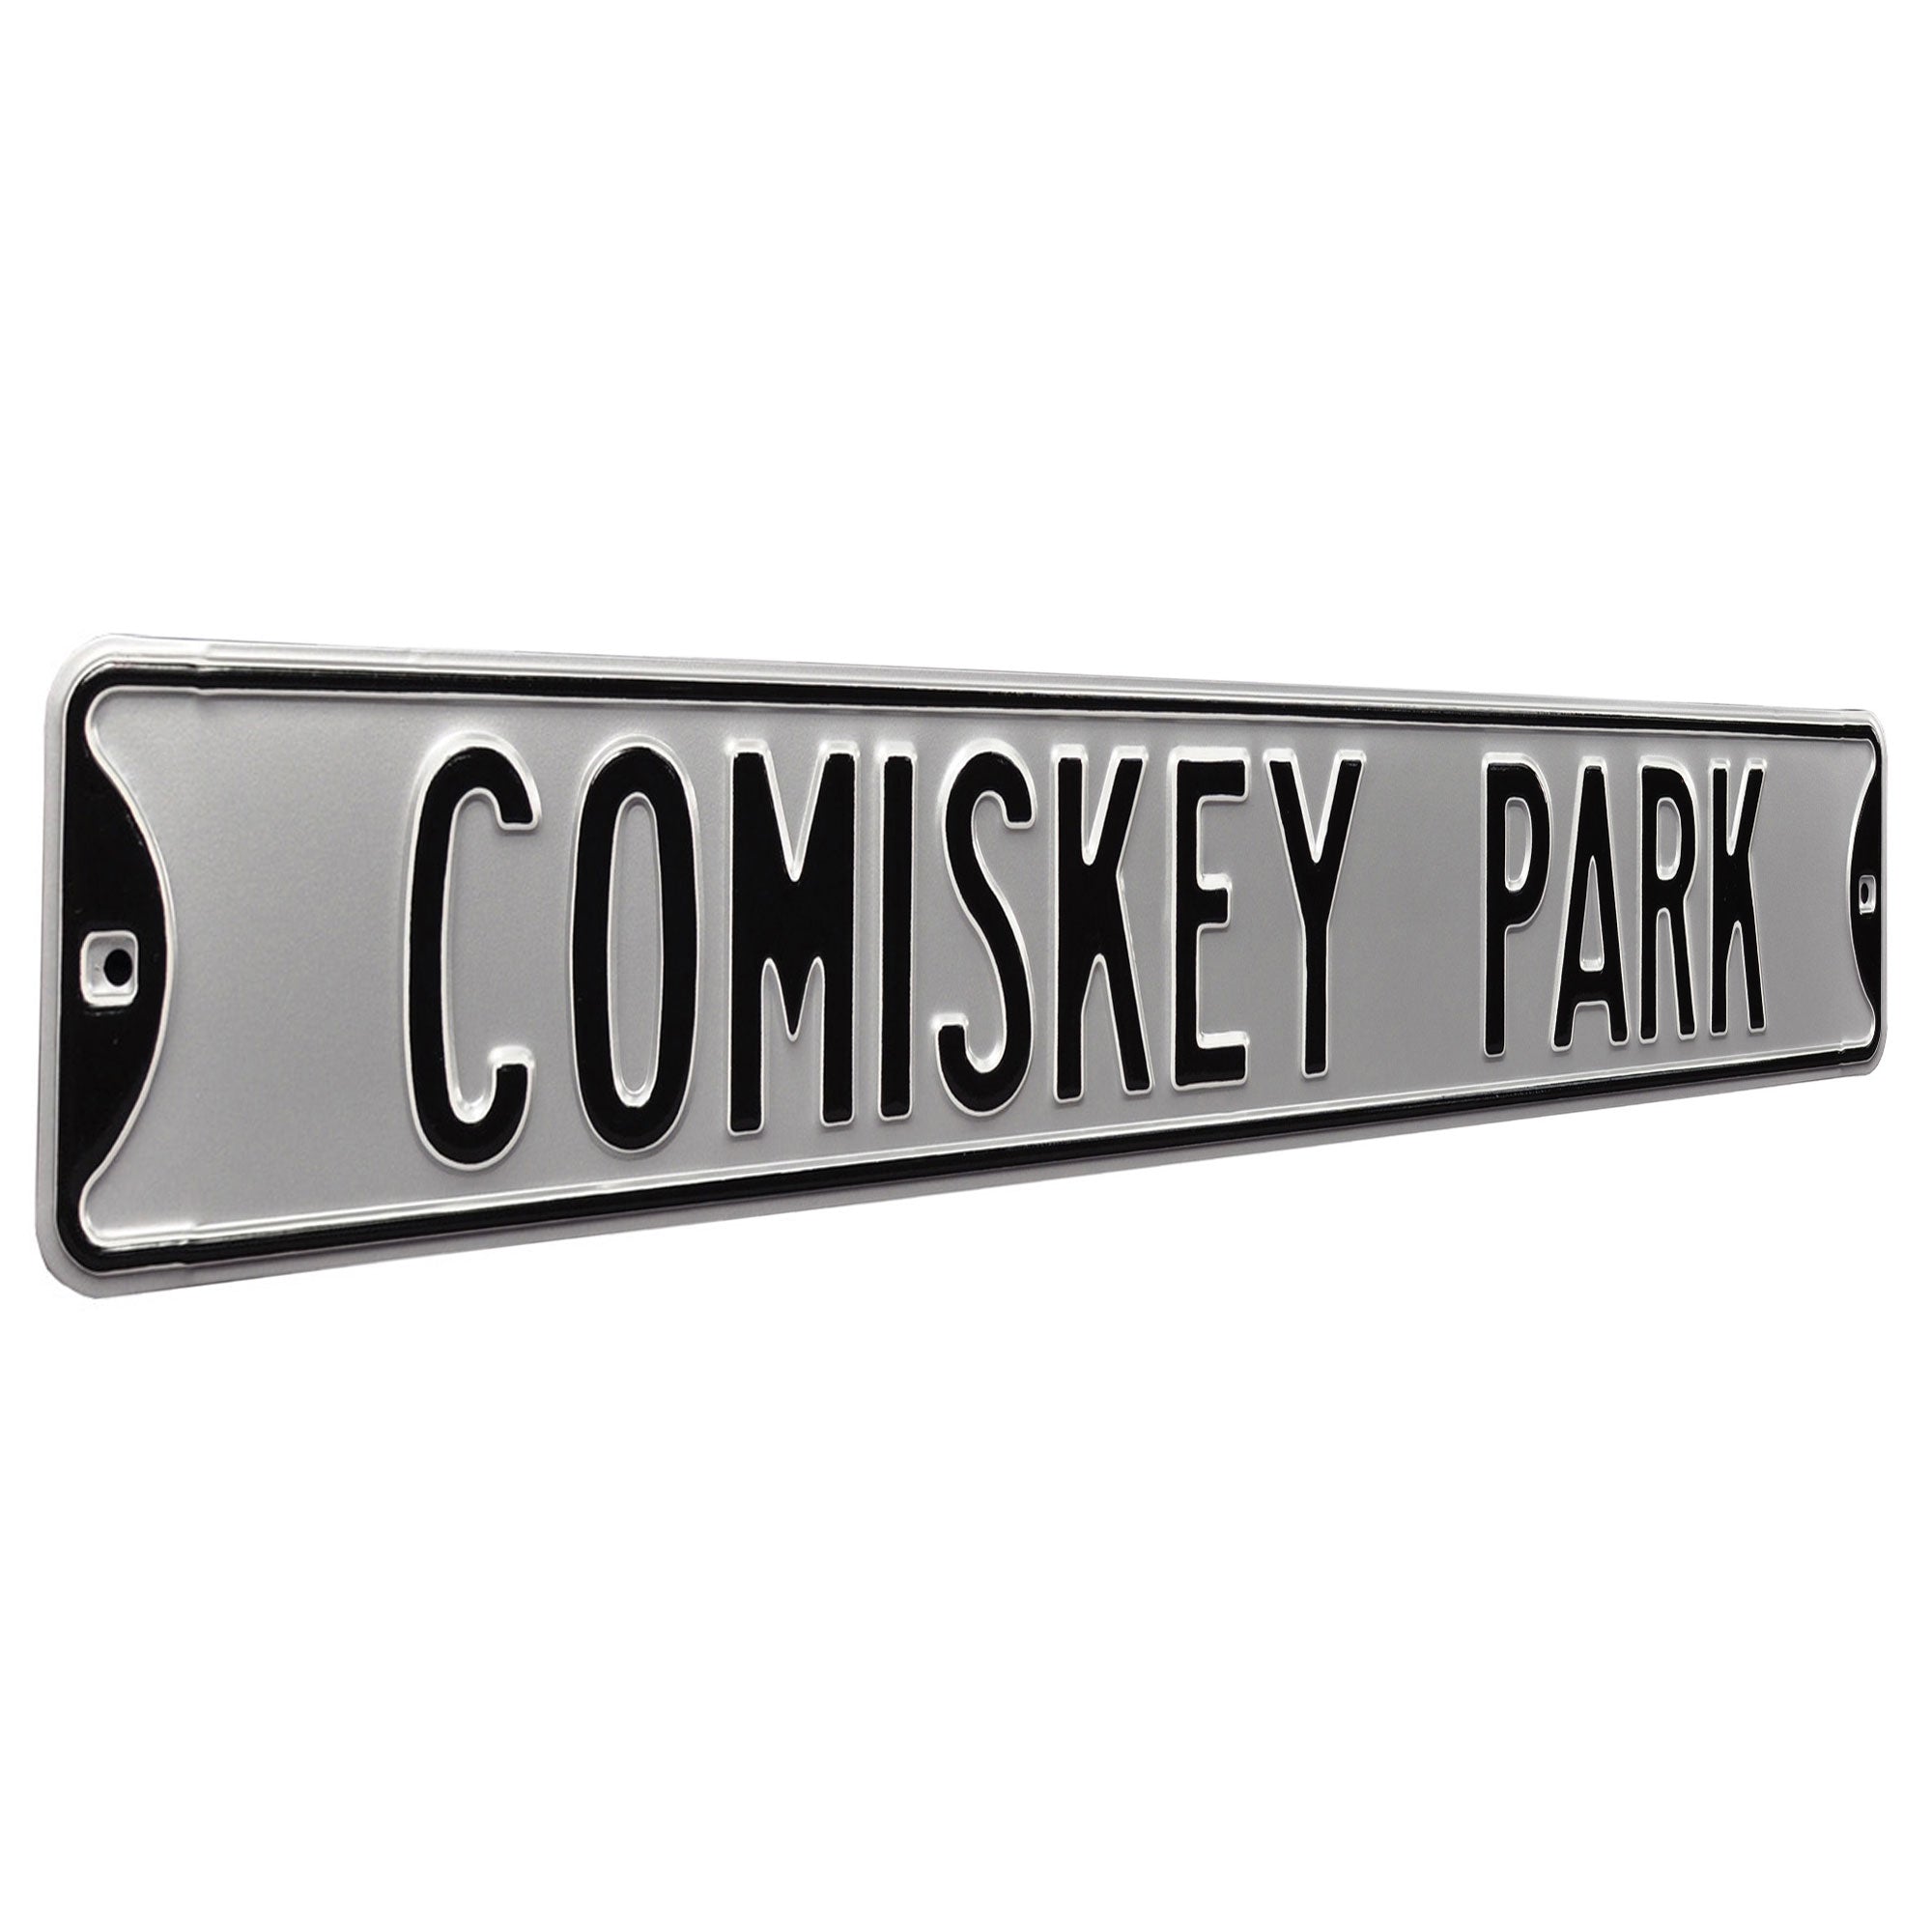 Chicago White Sox: Comiskey Park Stadium Mural - Officially Licensed MLB  Removable Wall Adhesive Decal